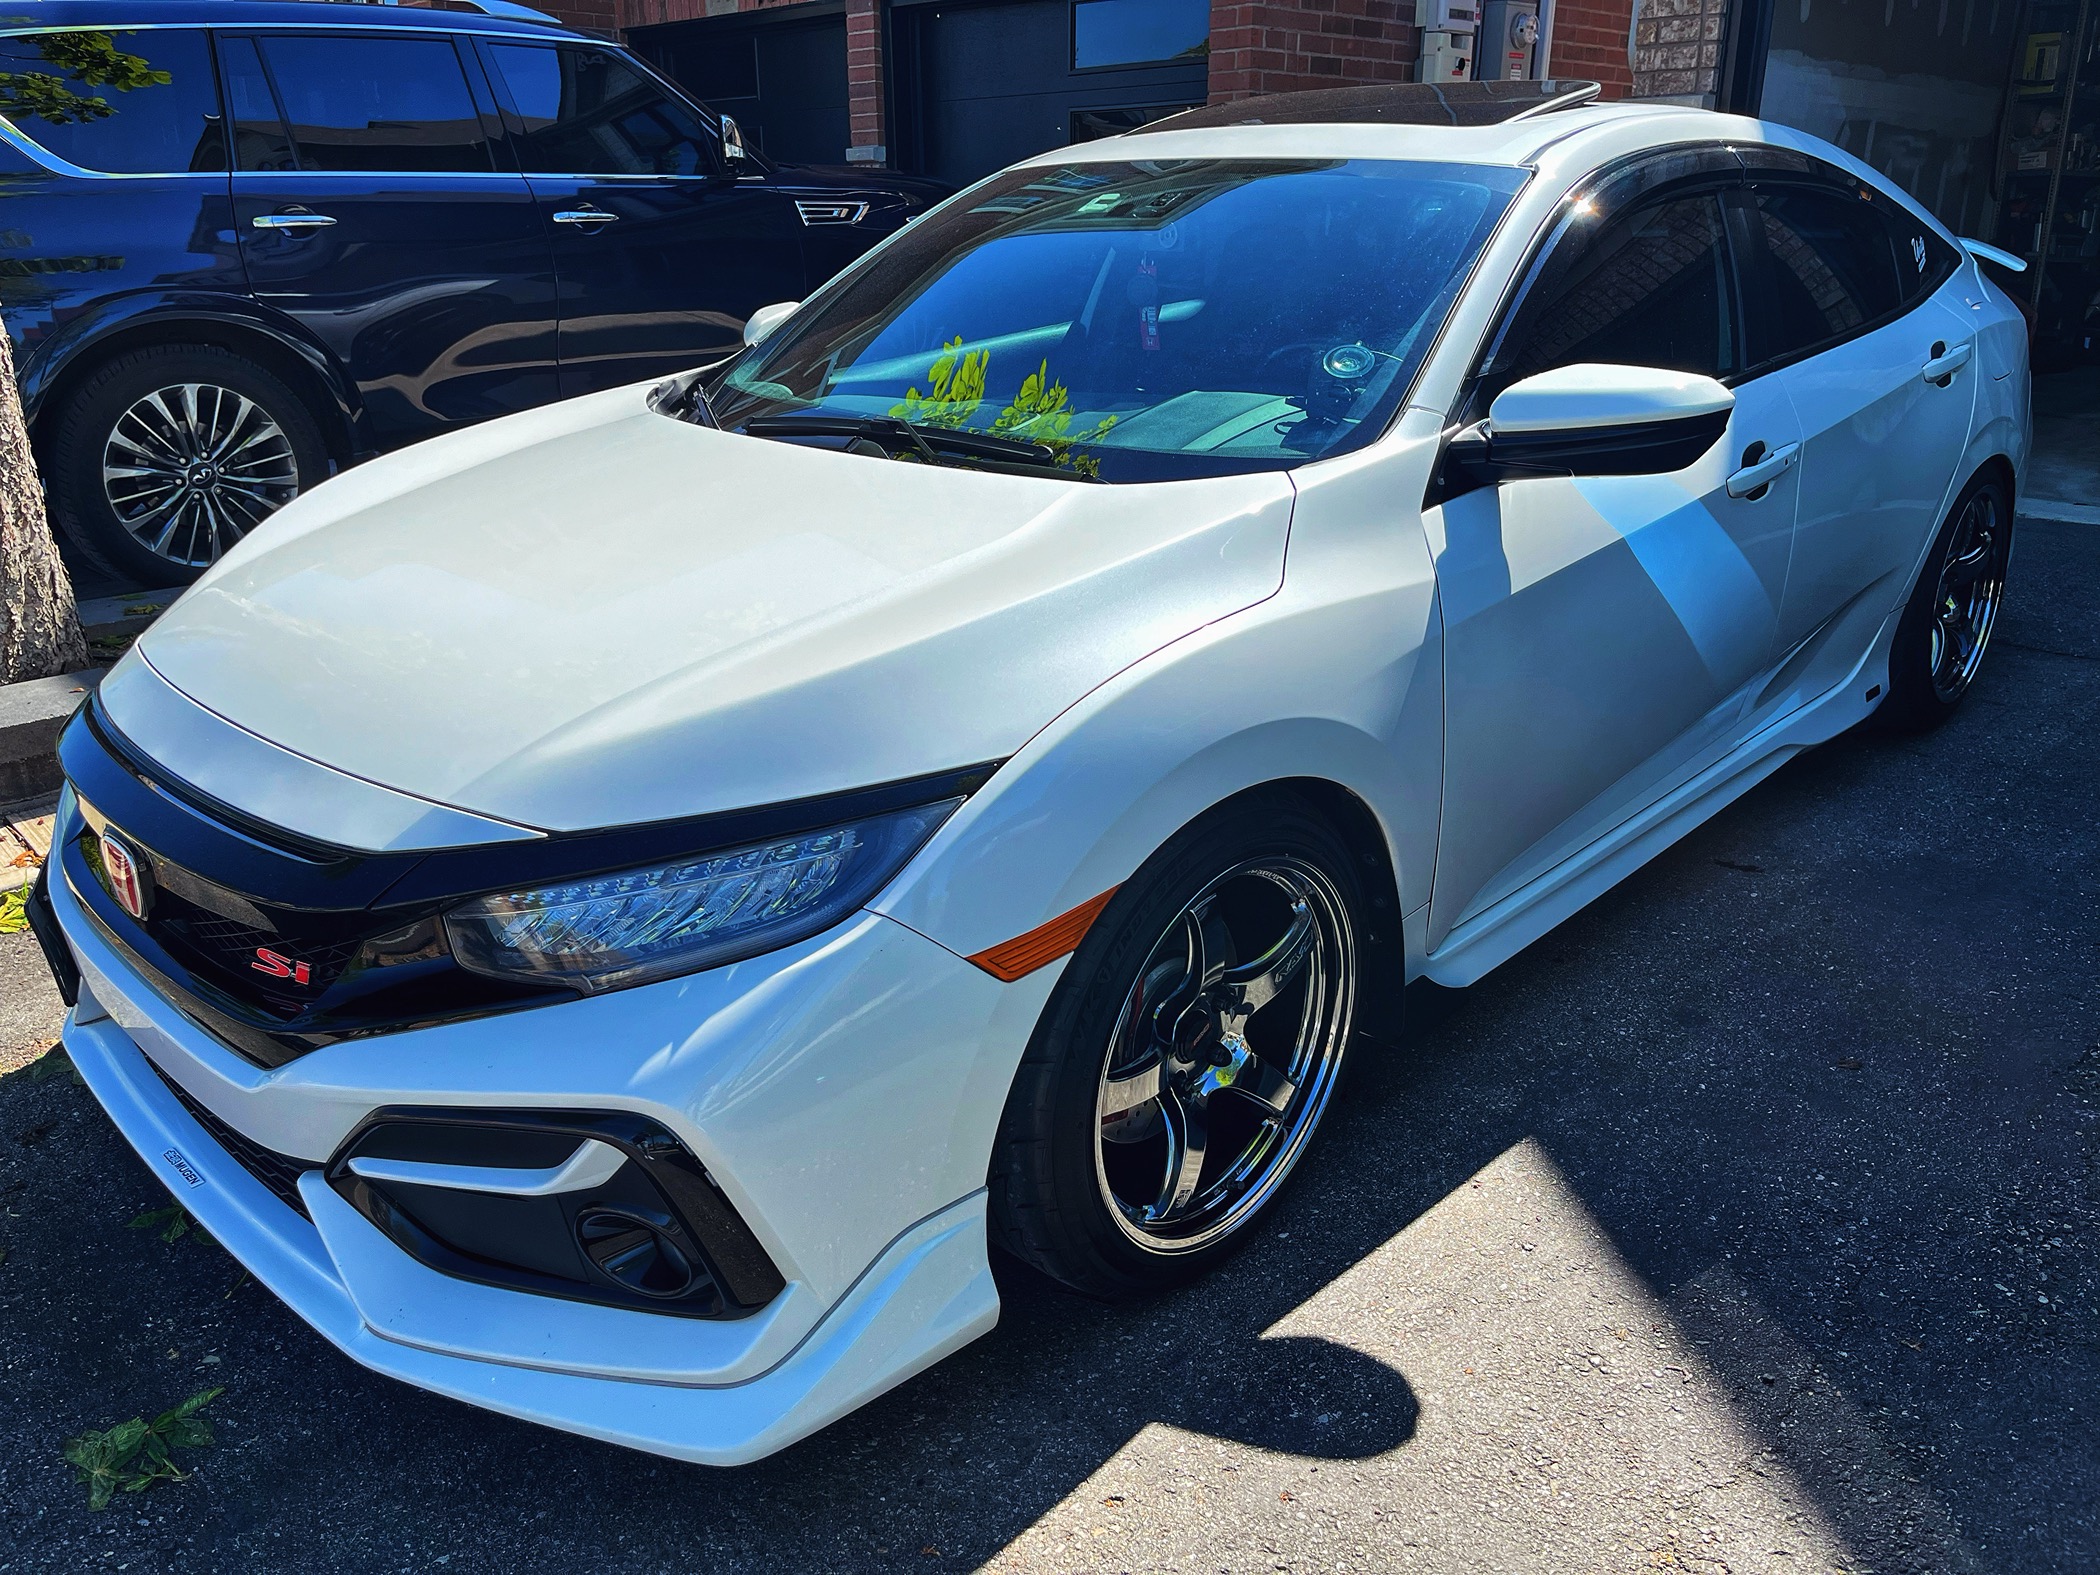 Honda Civic 10th gen What's your SI looking like today? 63F06002-B6D6-4D9B-872A-4F032E07C30B